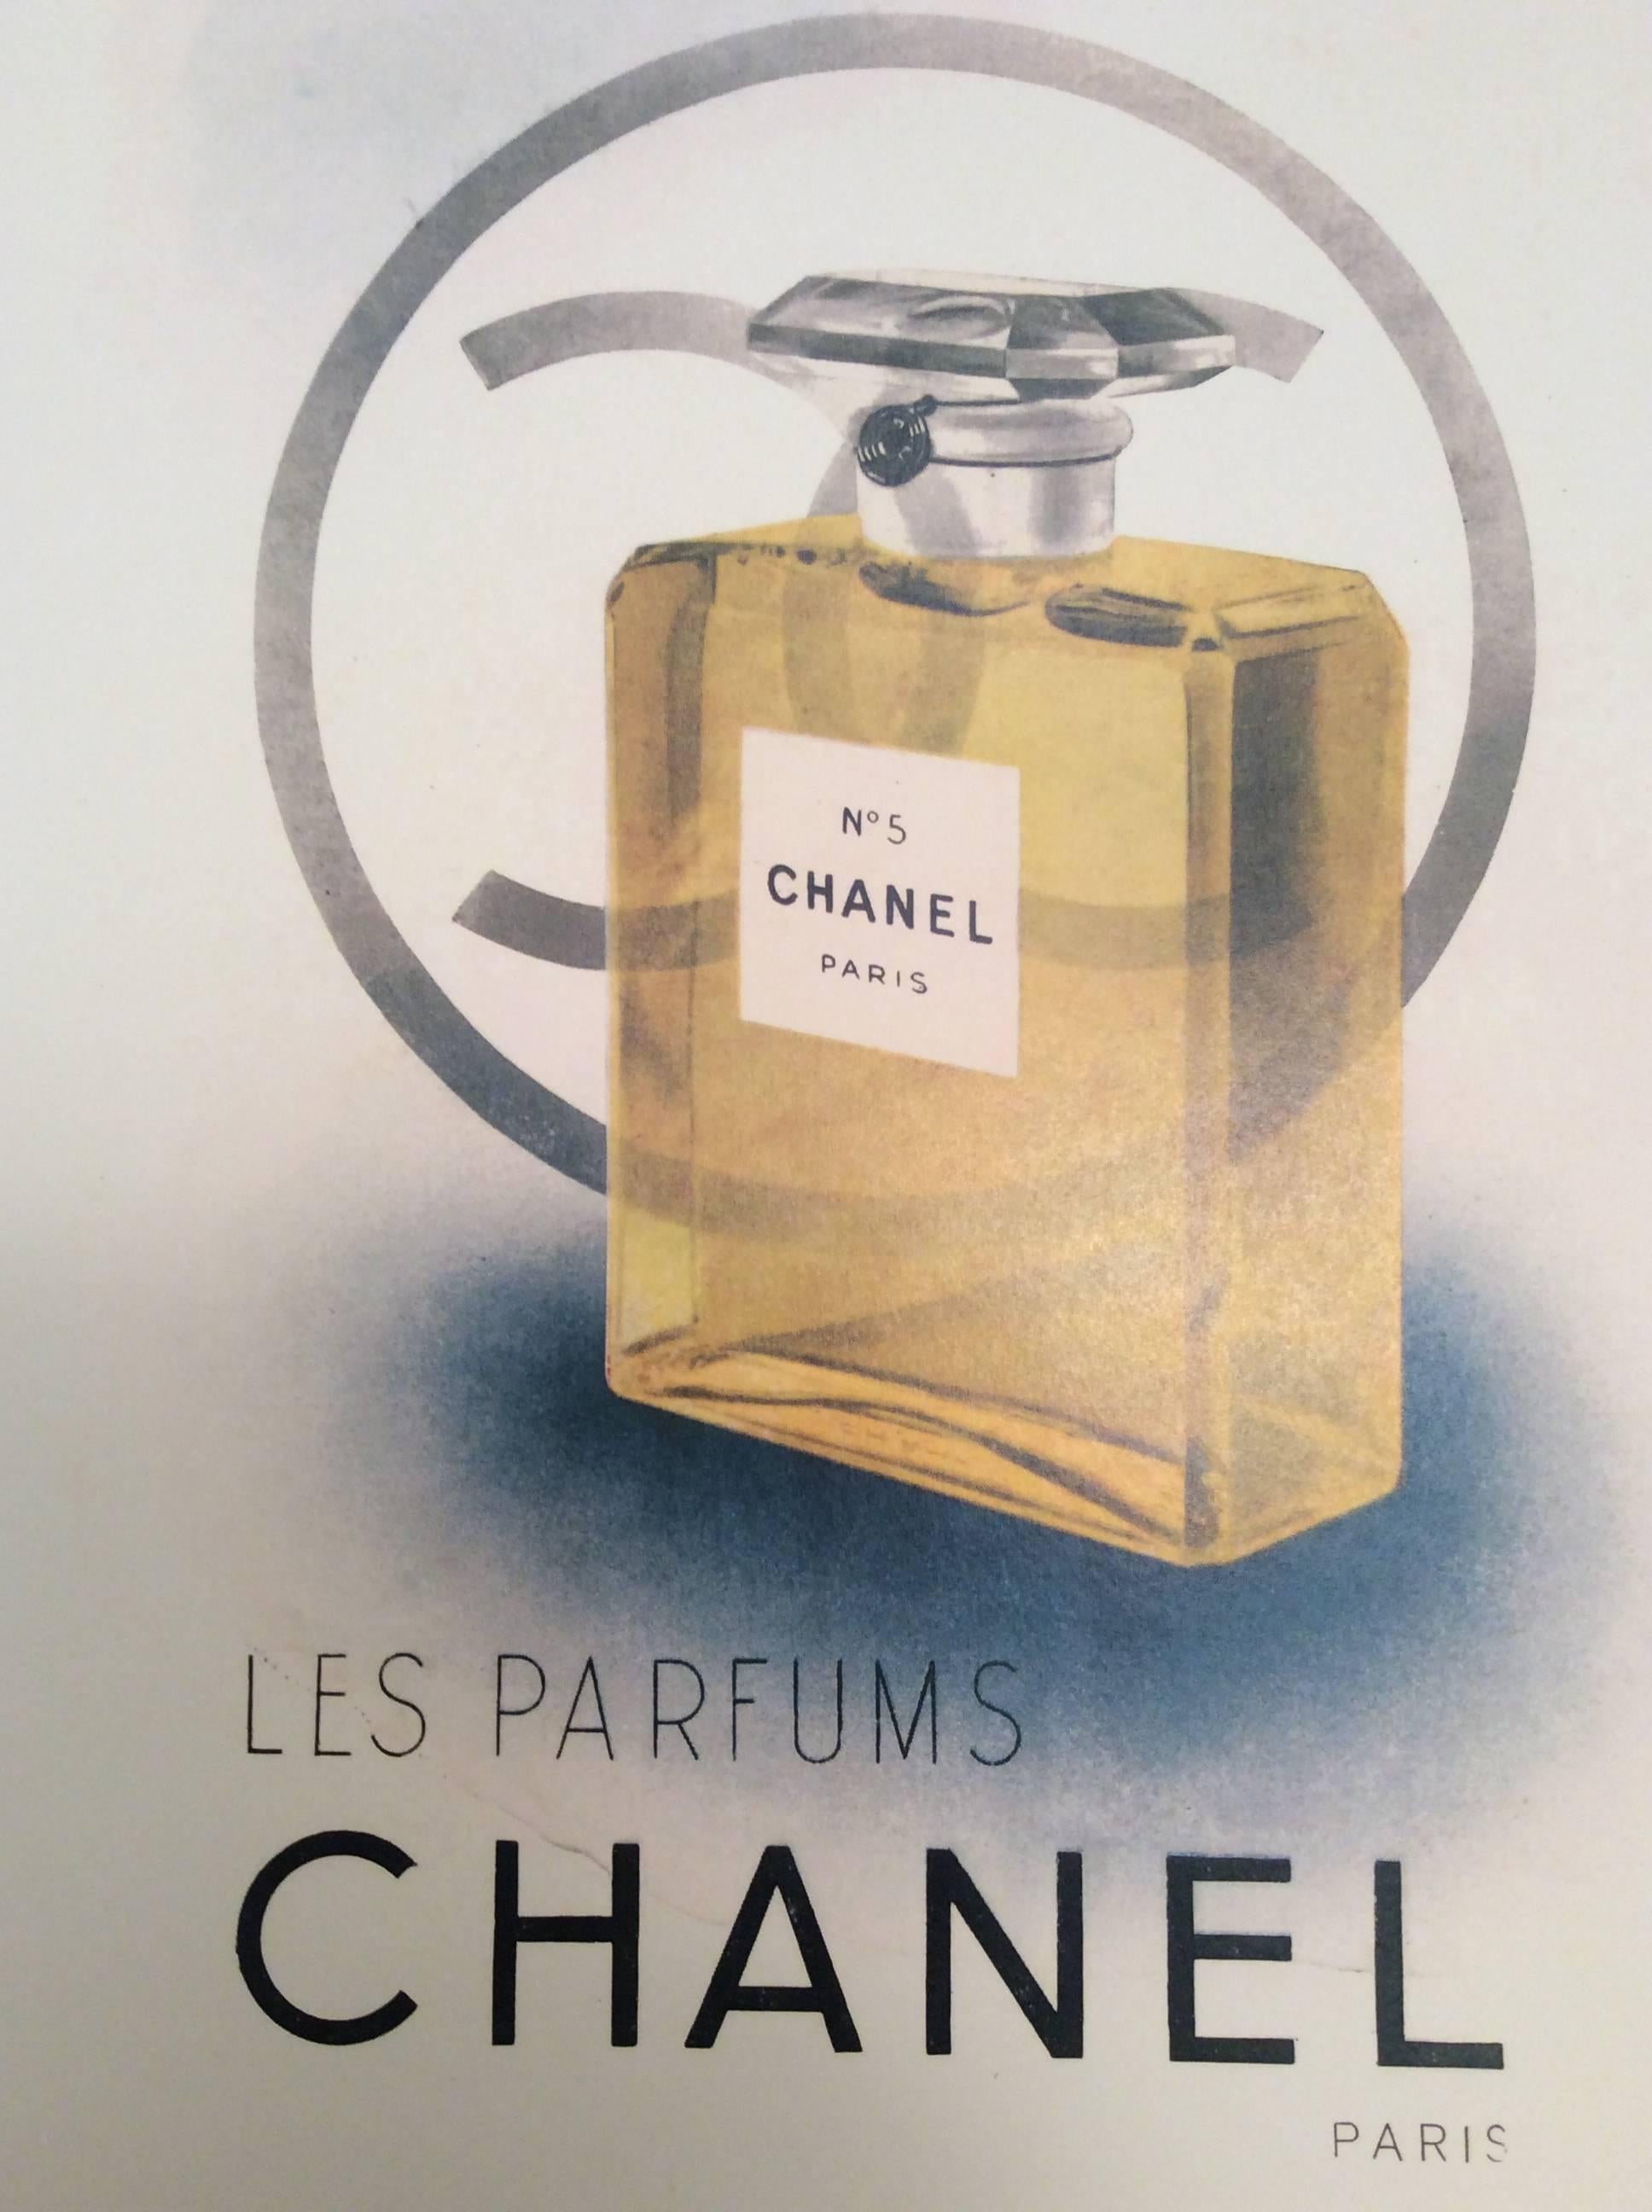 Chanel Perfume Bottle Ad Print - 1940's at 1stDibs